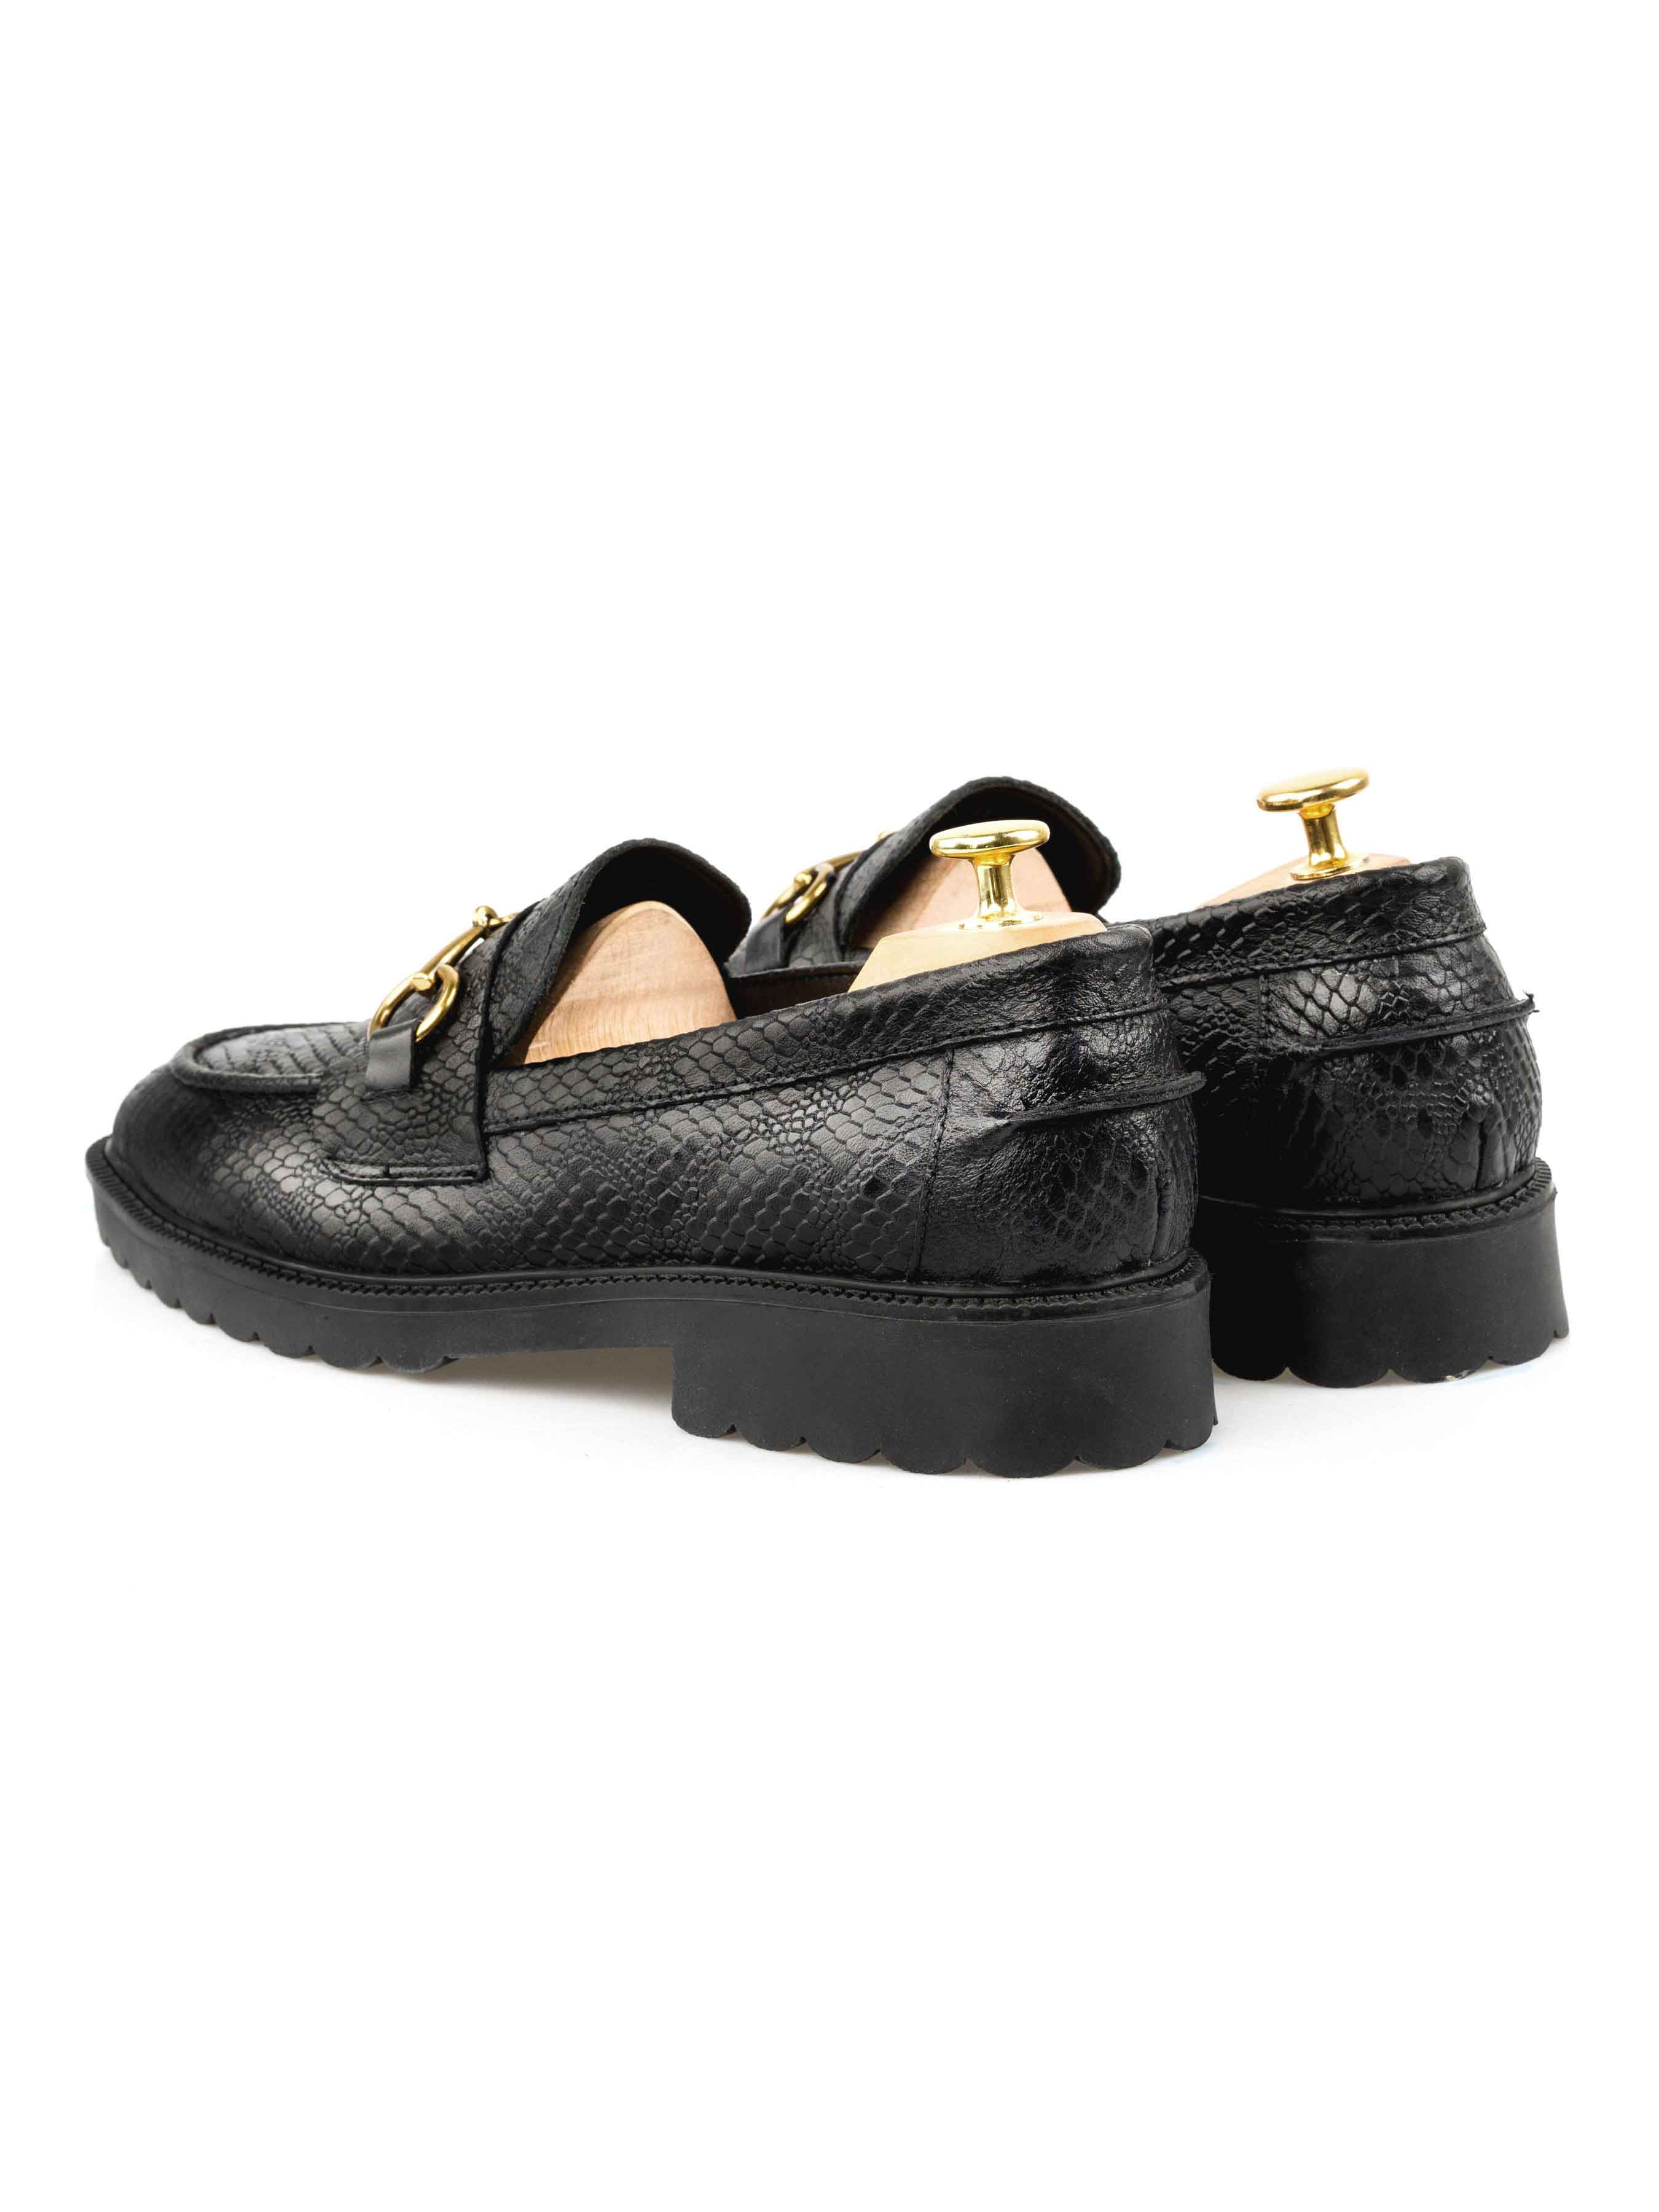 Penny Loafer Horsebit Buckle - Black Phyton Leather (Combat Sole)